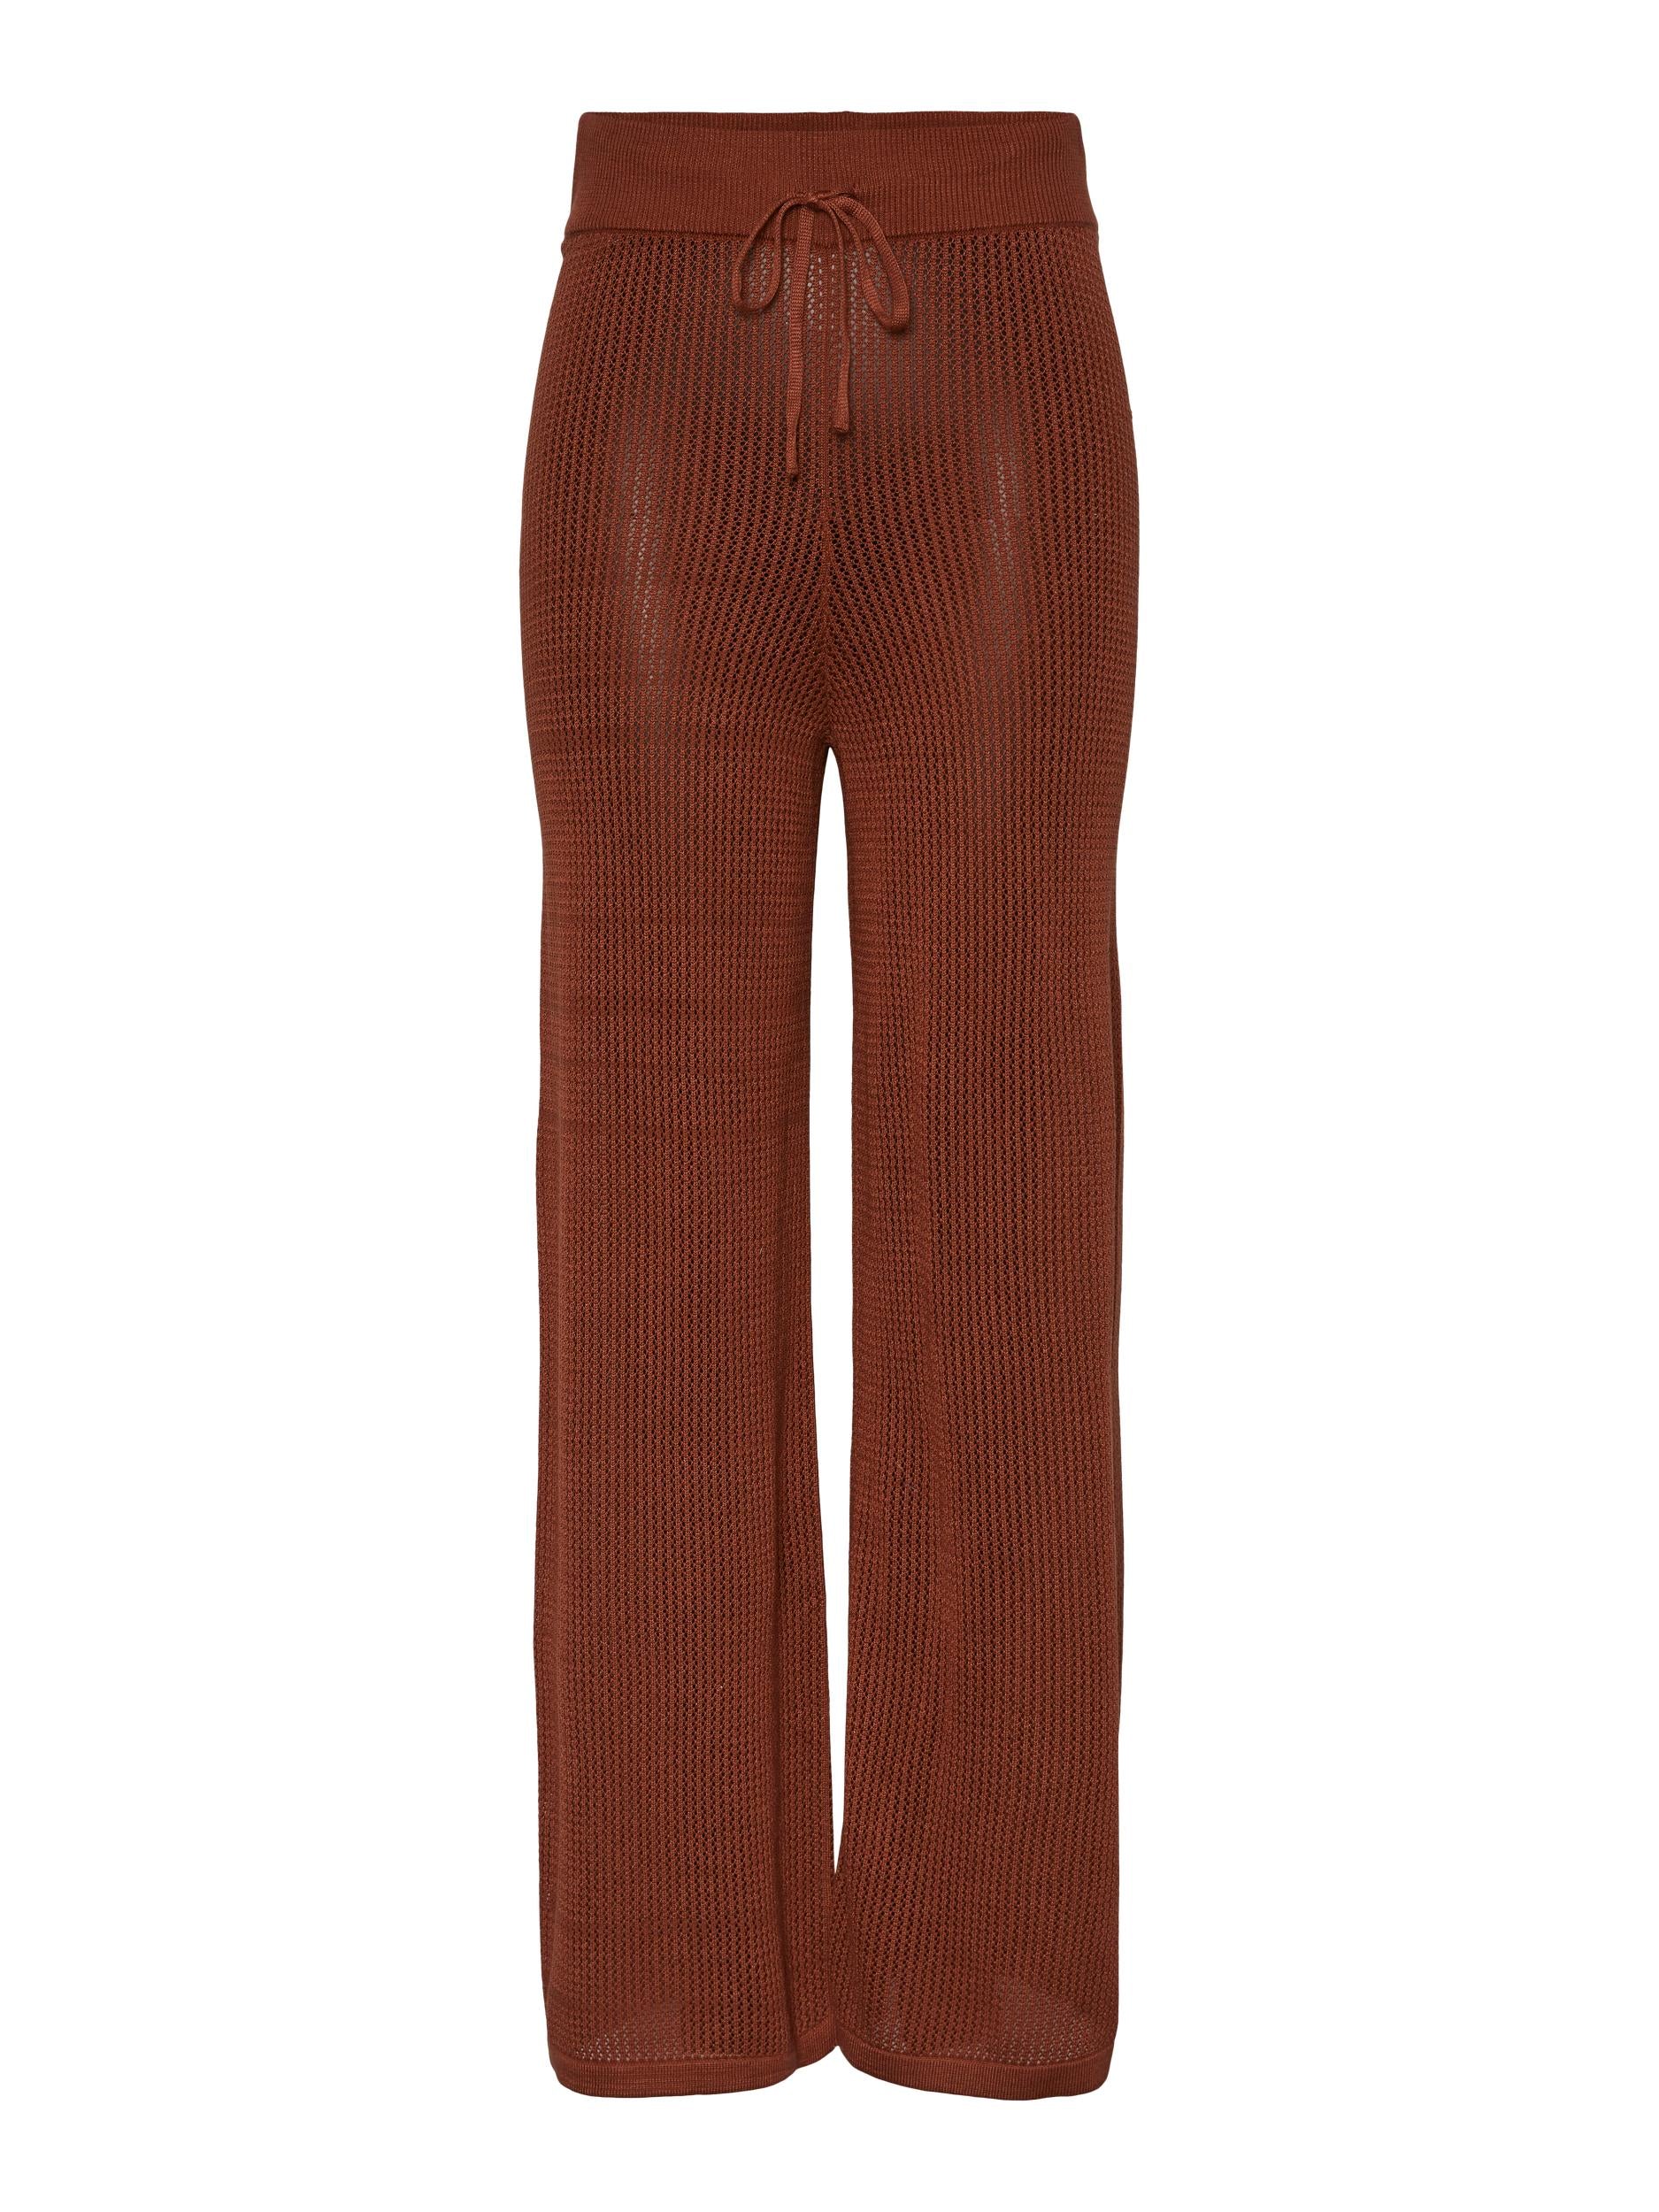 Pieces brown trousers